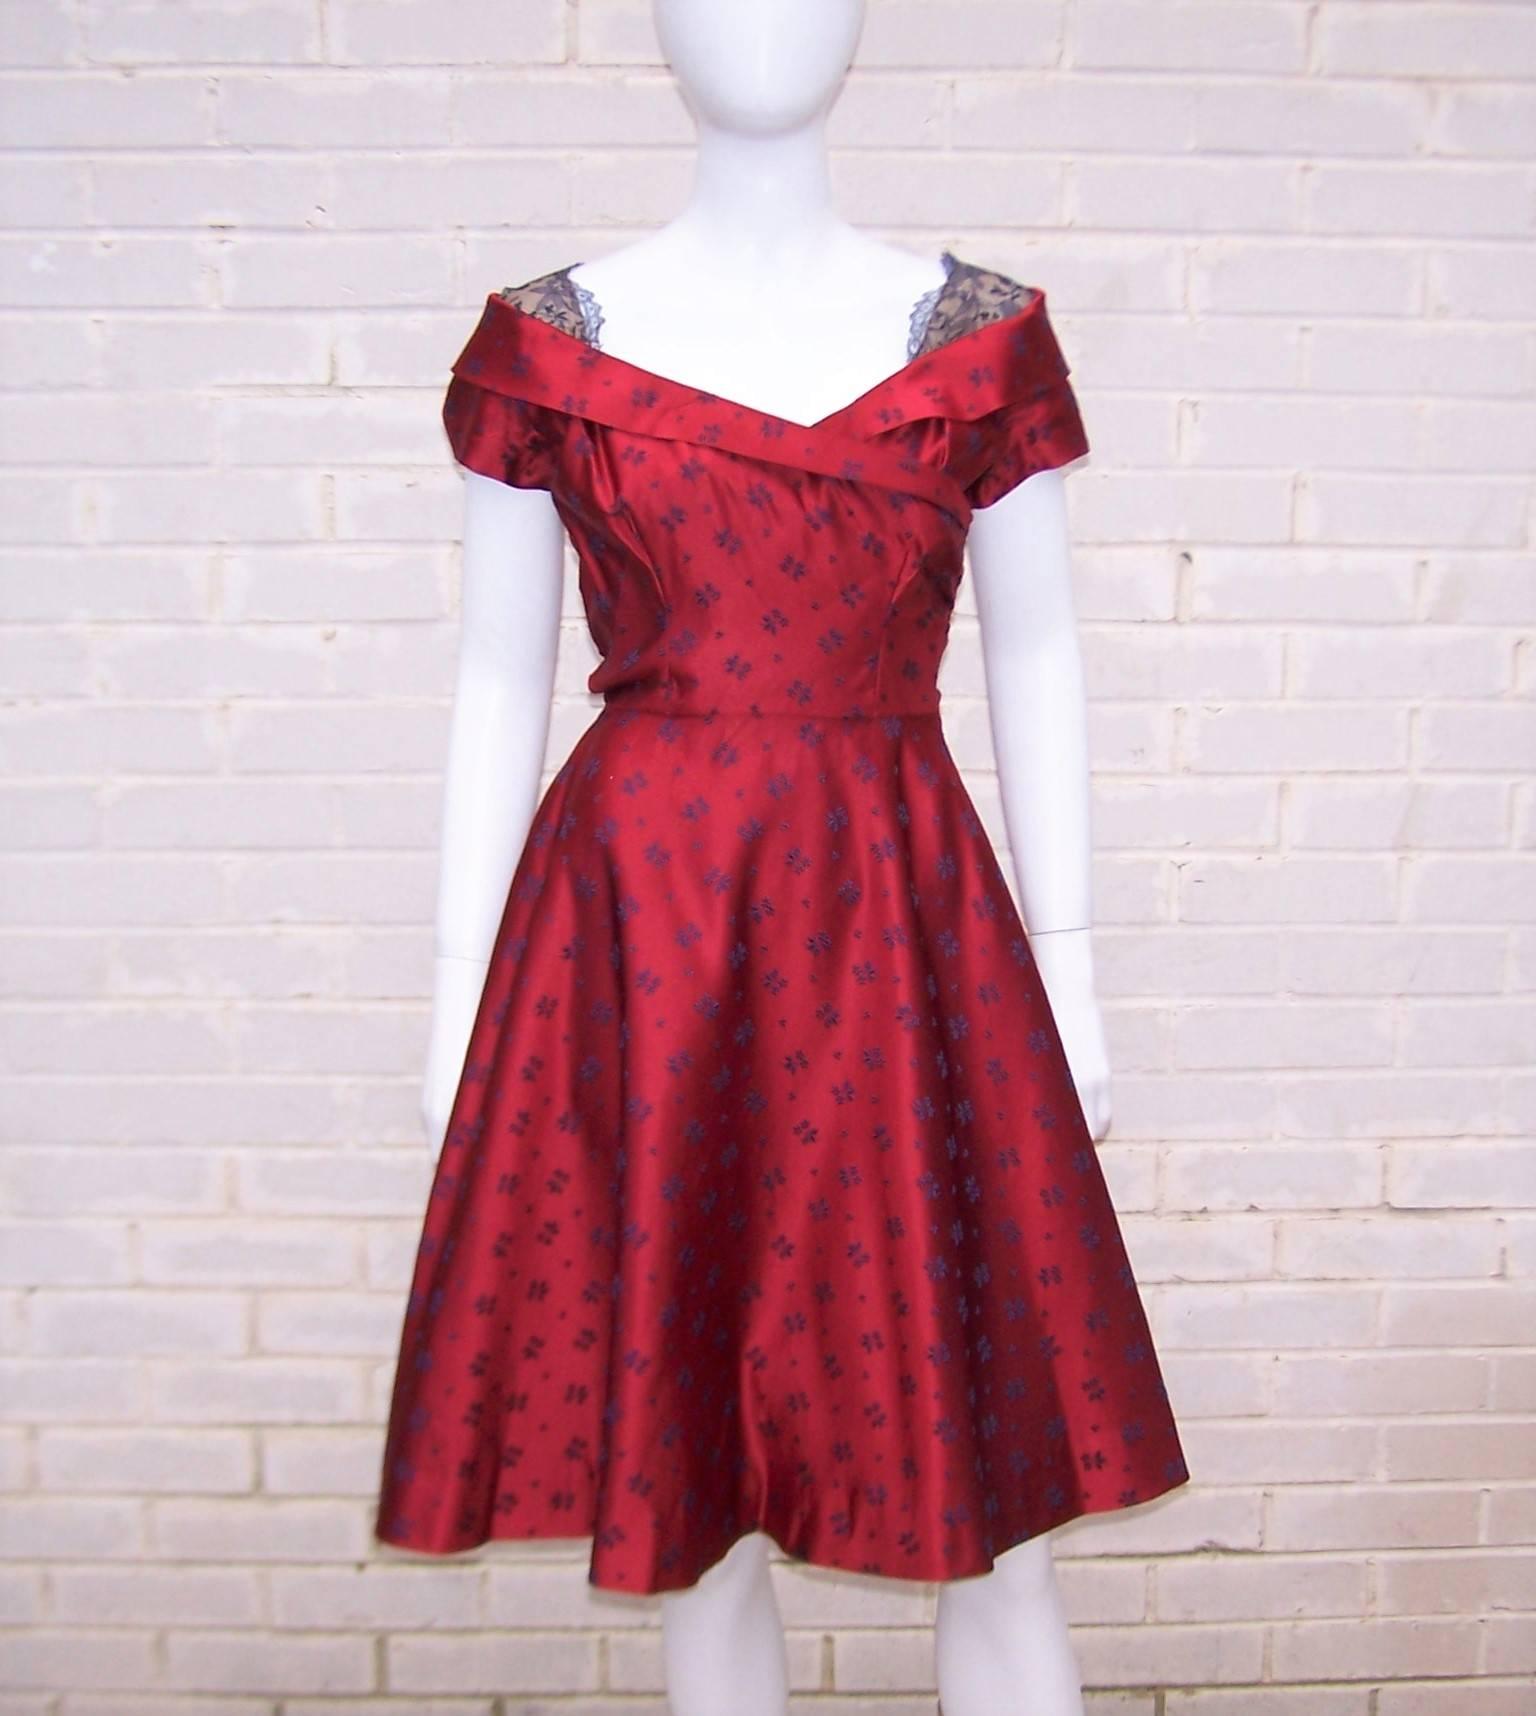 This early Adele Simpson design is the epitome of a fun party dress.  The cherry red satin fabric is accented with navy blue flowers and provides the right amount of stiff structure to create both a cinched and flared silhouette.  The dress zips and